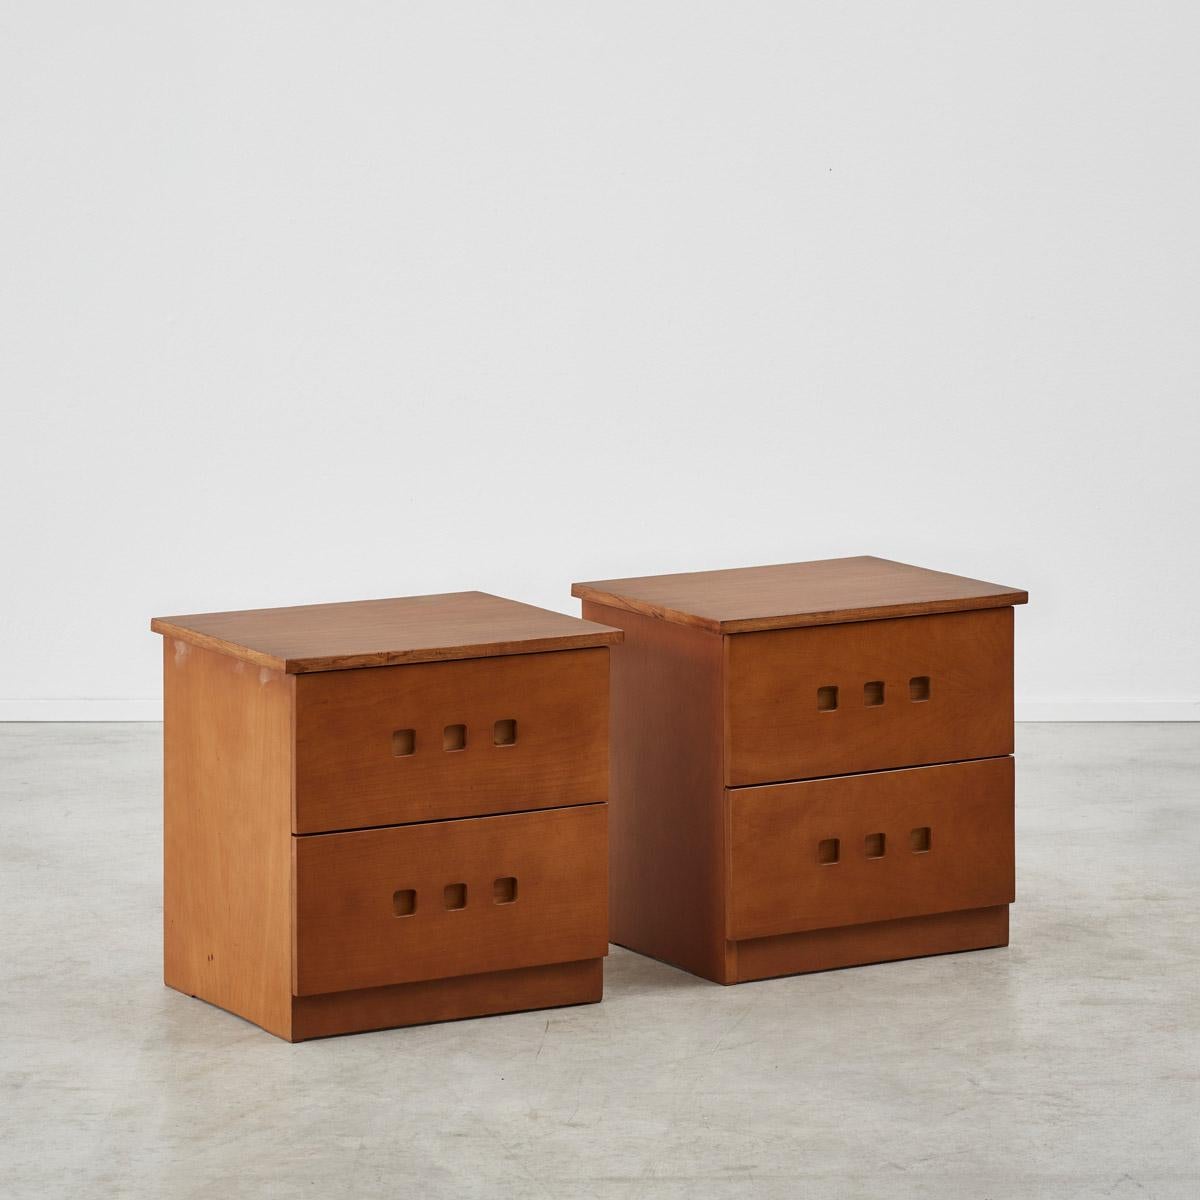 A pair of Italian wooden bedside tables, with two well sized drawers and square recessed handles. Their function doesn’t negate their beauty, with geometric shapes echoed throughout. 

The side tables have been recently restored; some texture/wear